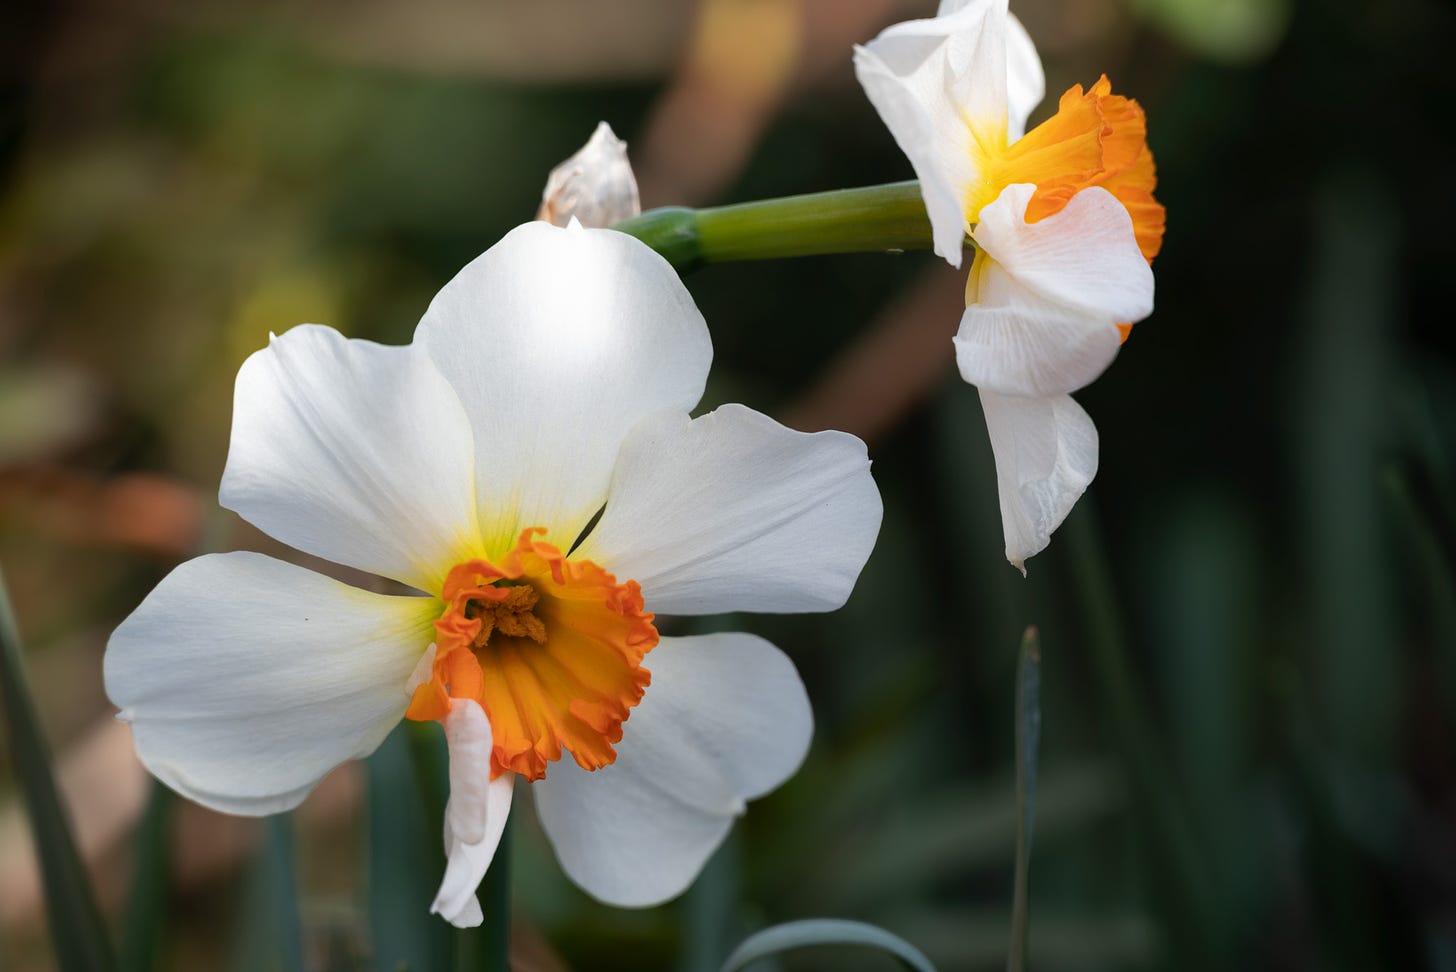 Two Barret Browning daffodils against a blurred background. The flowers have white petals with short orange cups that are less than 1/3 the length of the petals